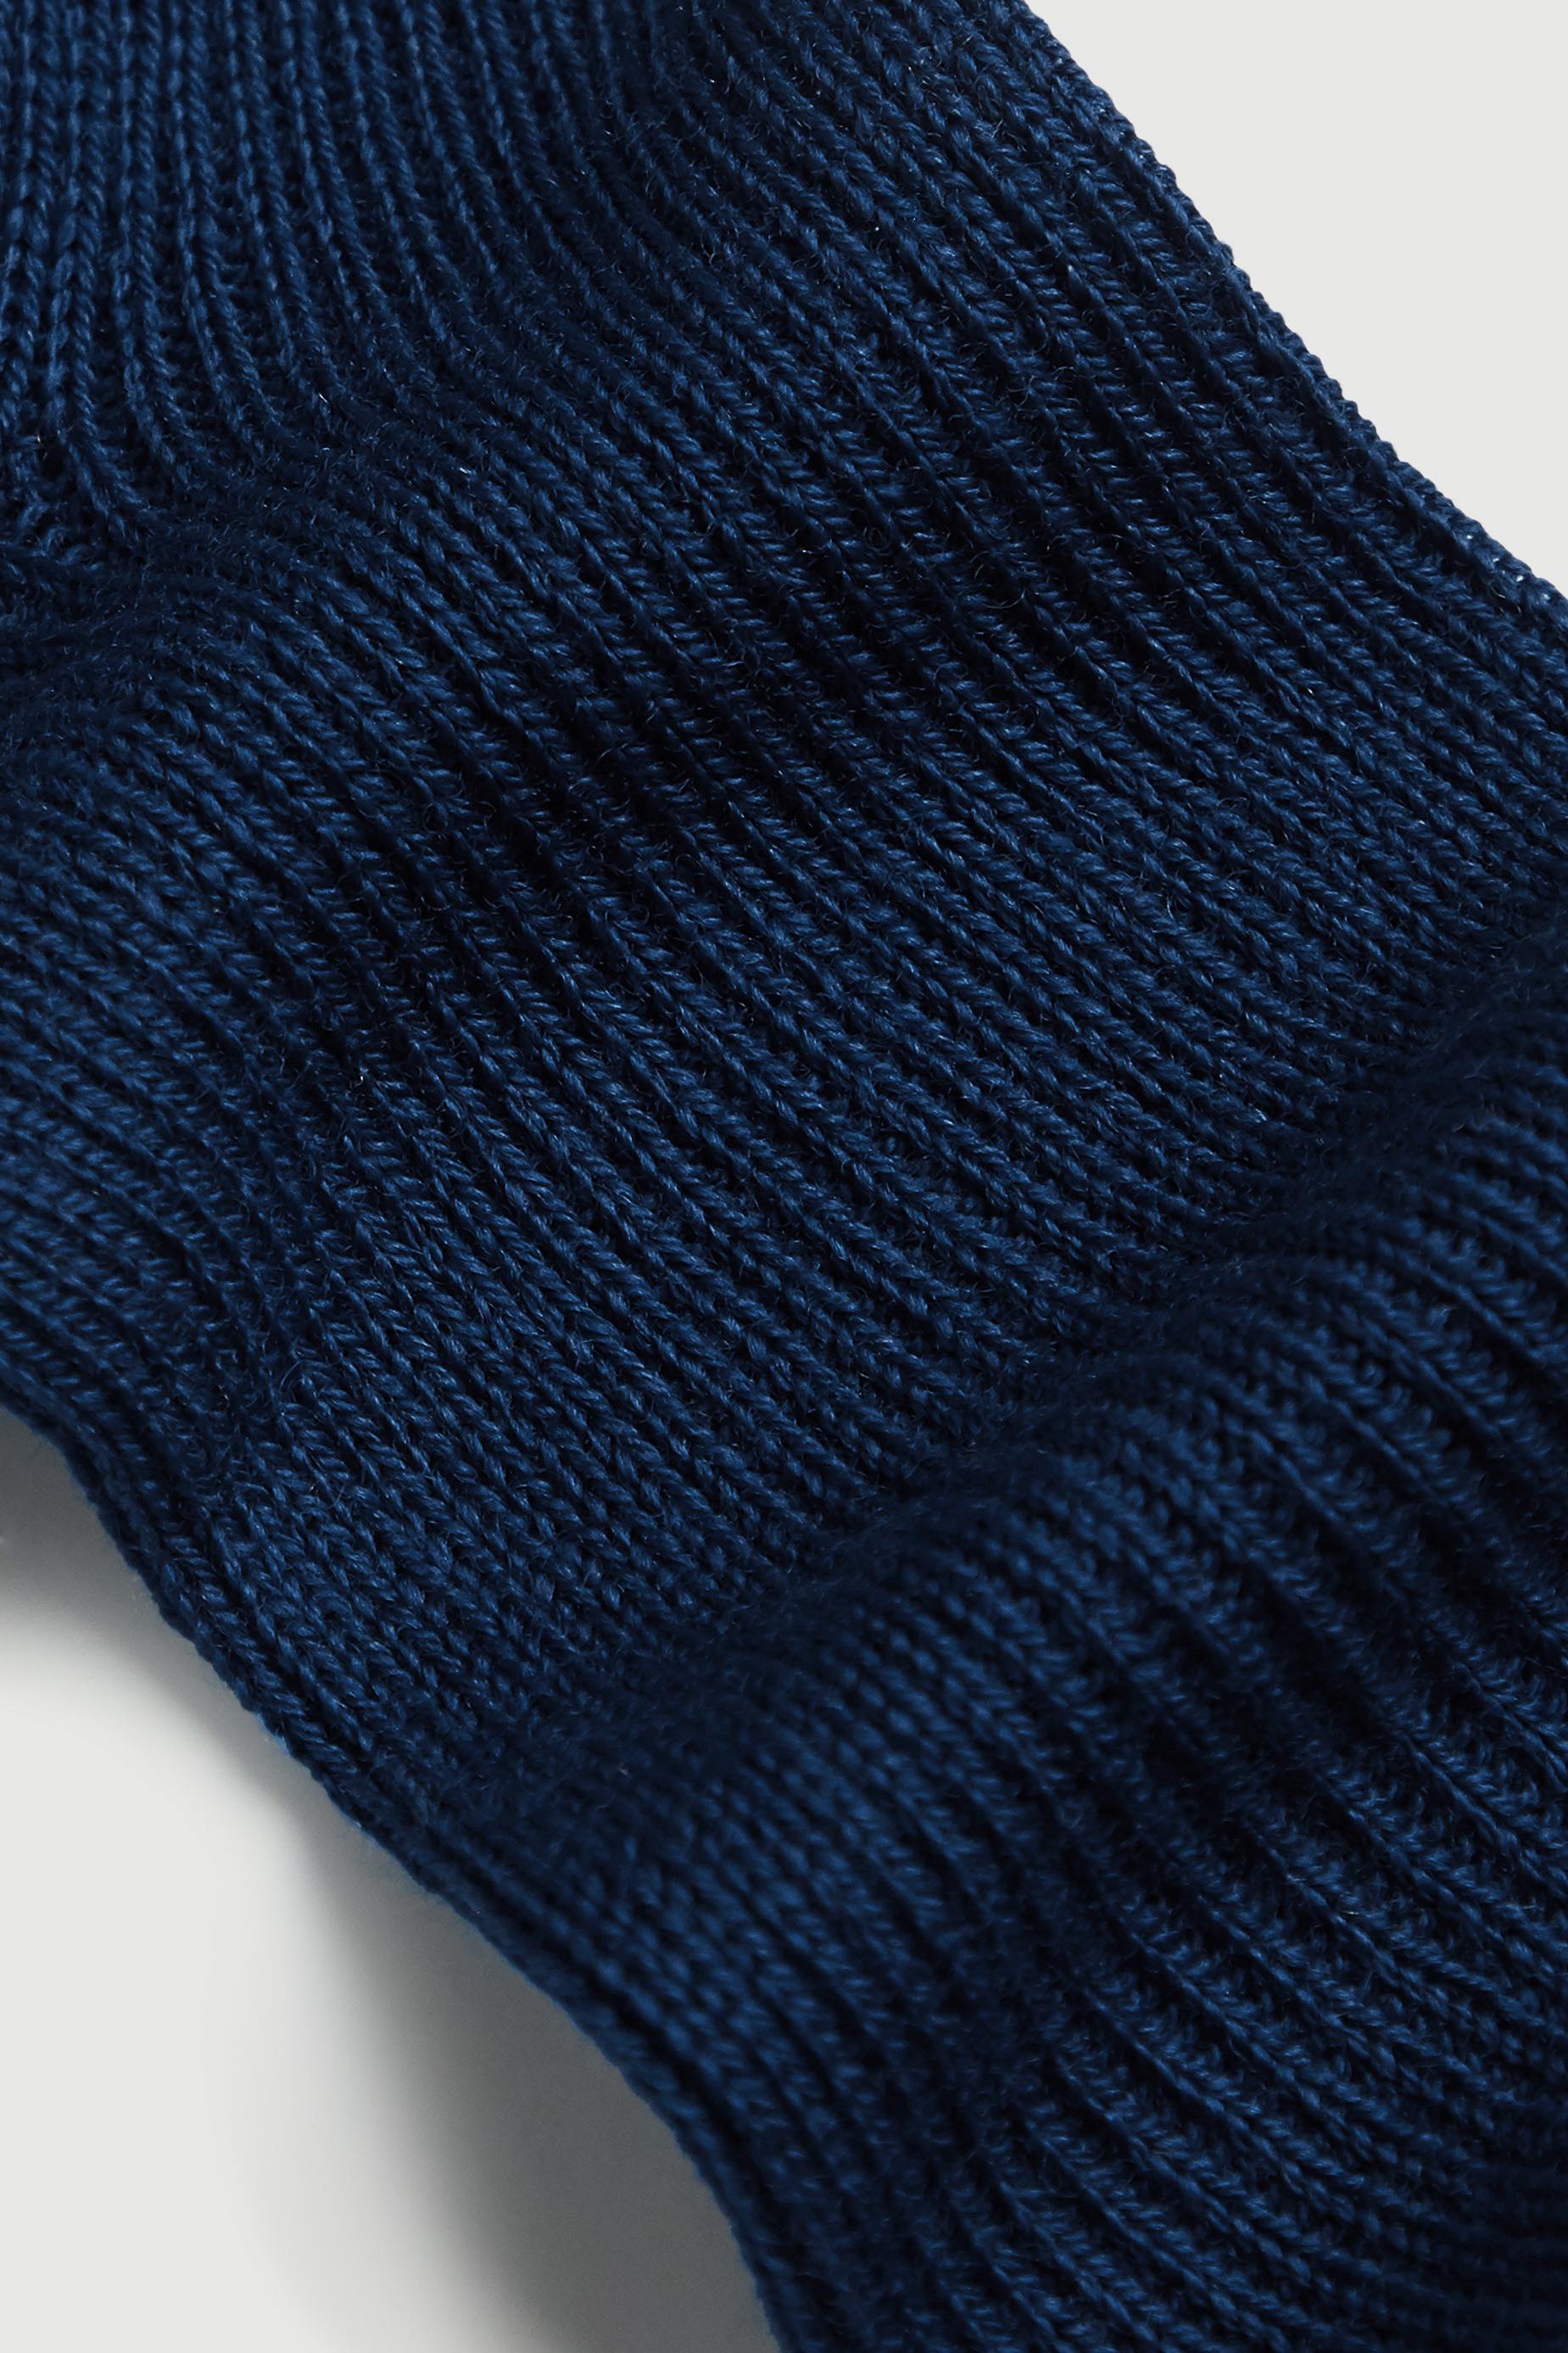 footbed detail, The Merino Sock in navy, merino wool, by Comme Si